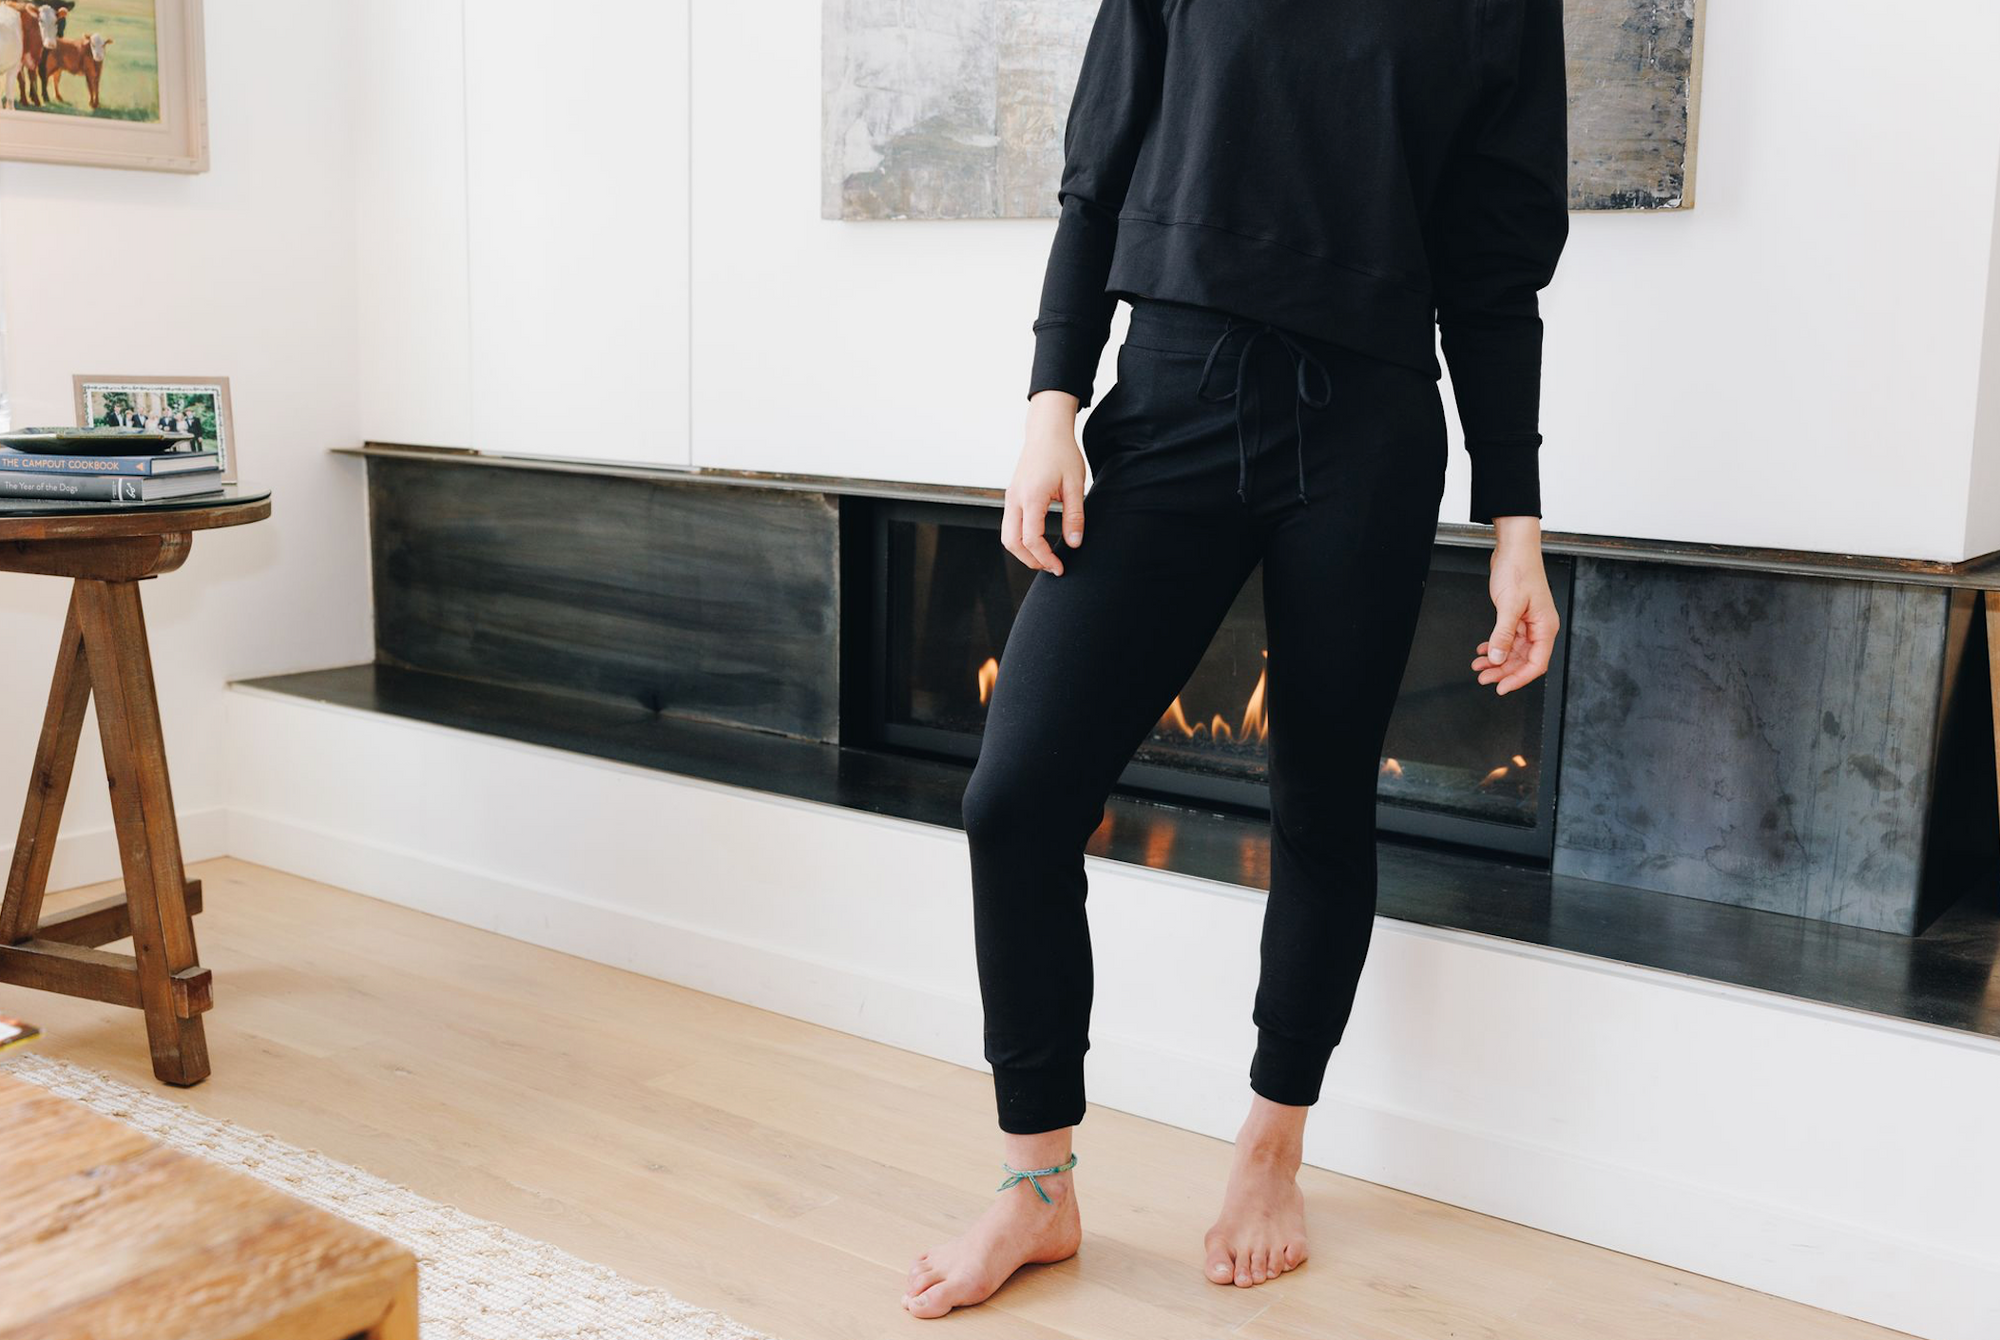 Balancing Cost and Quality in Sleepwear and Loungewear